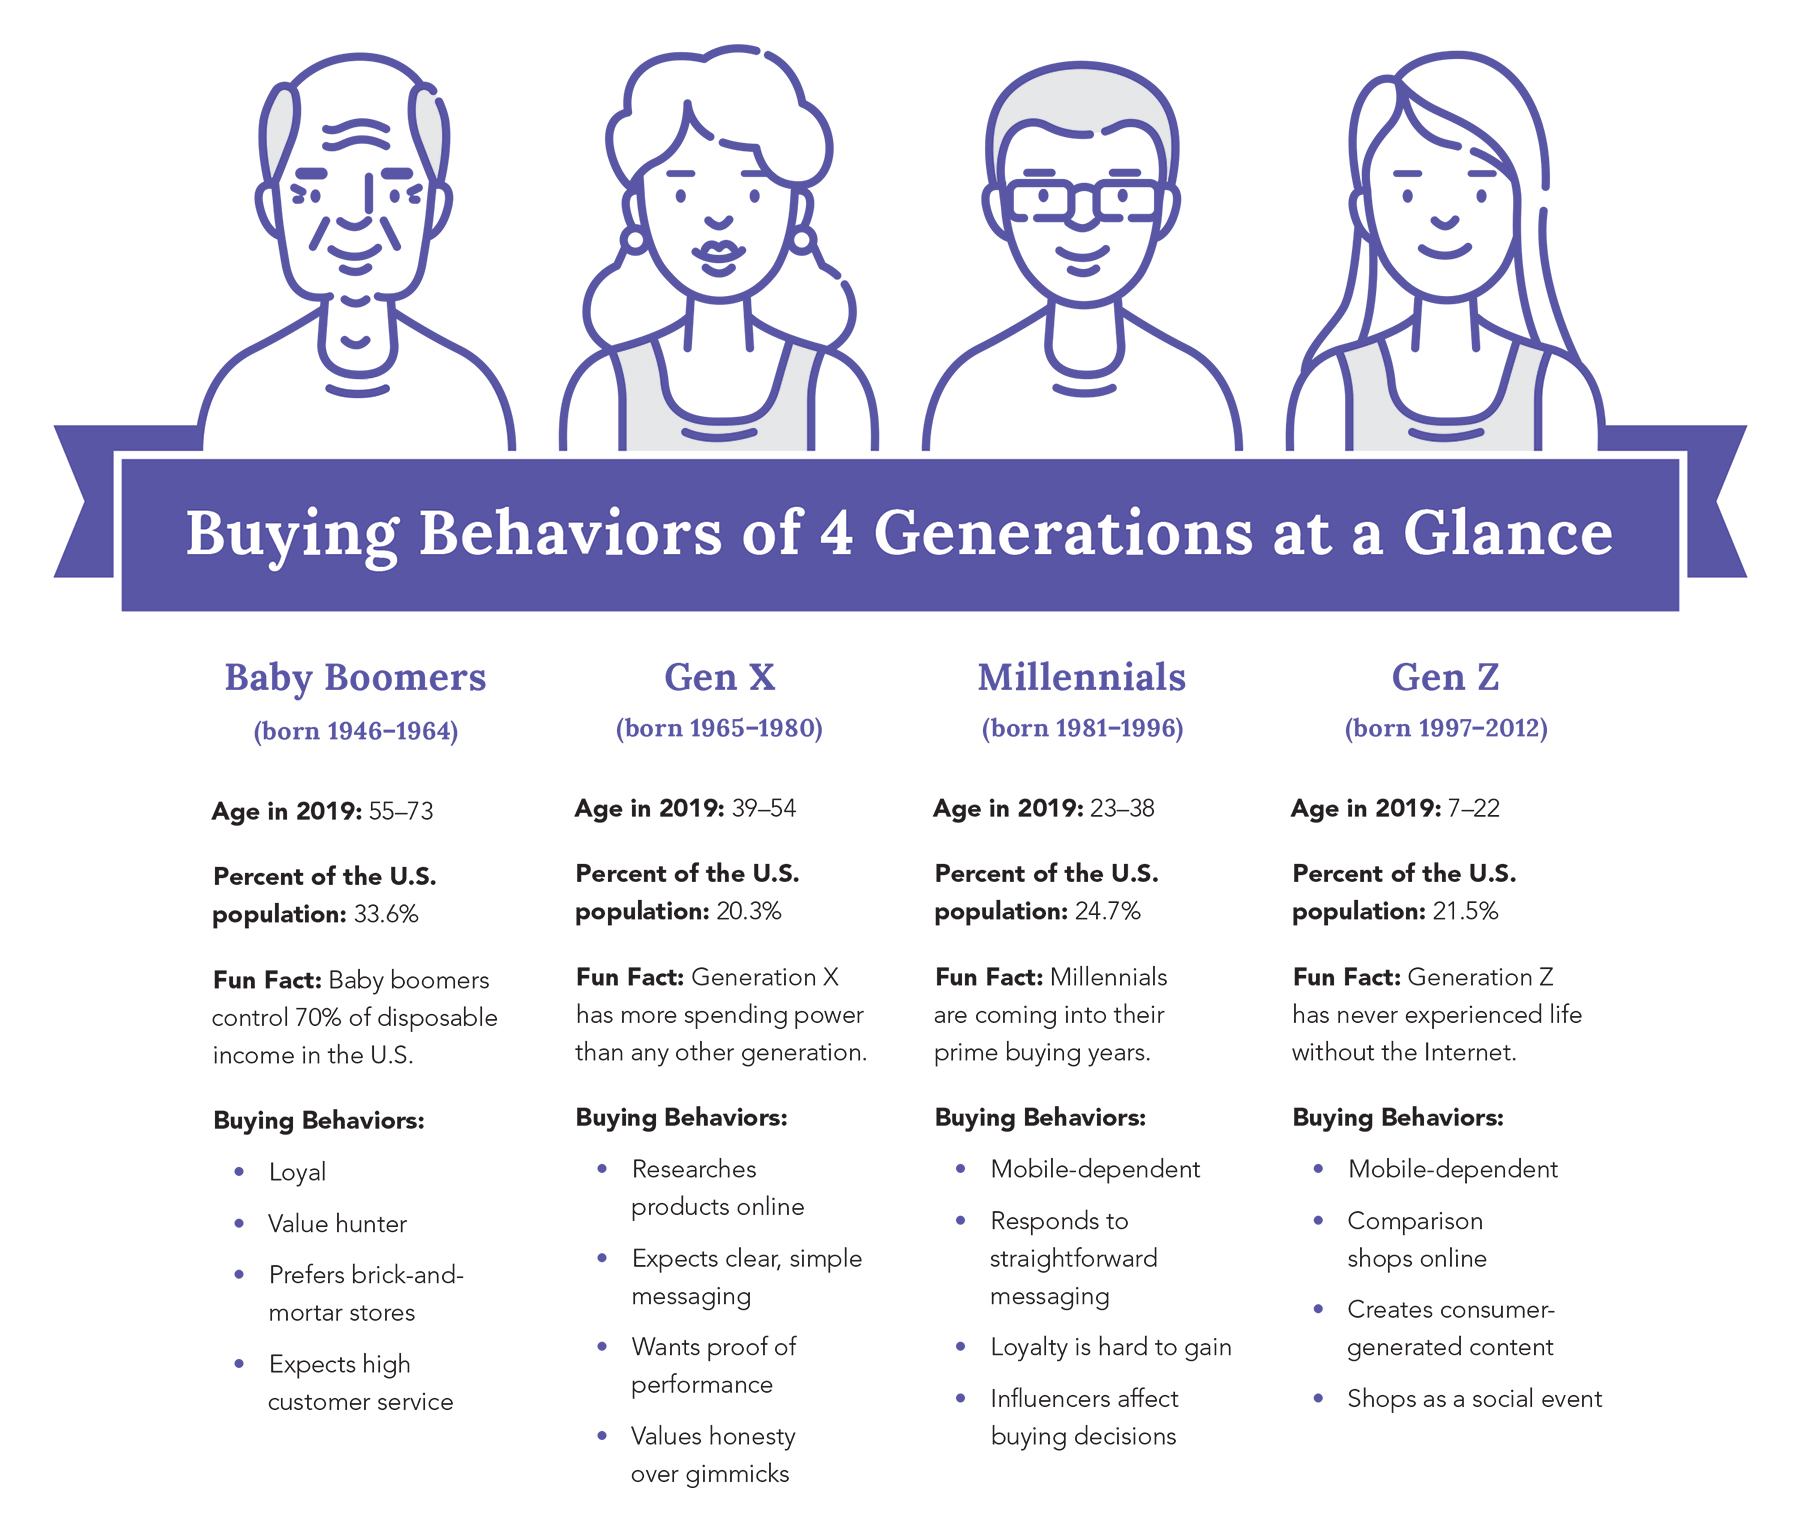 Buying Behaviors of 4 Generations at a Glance